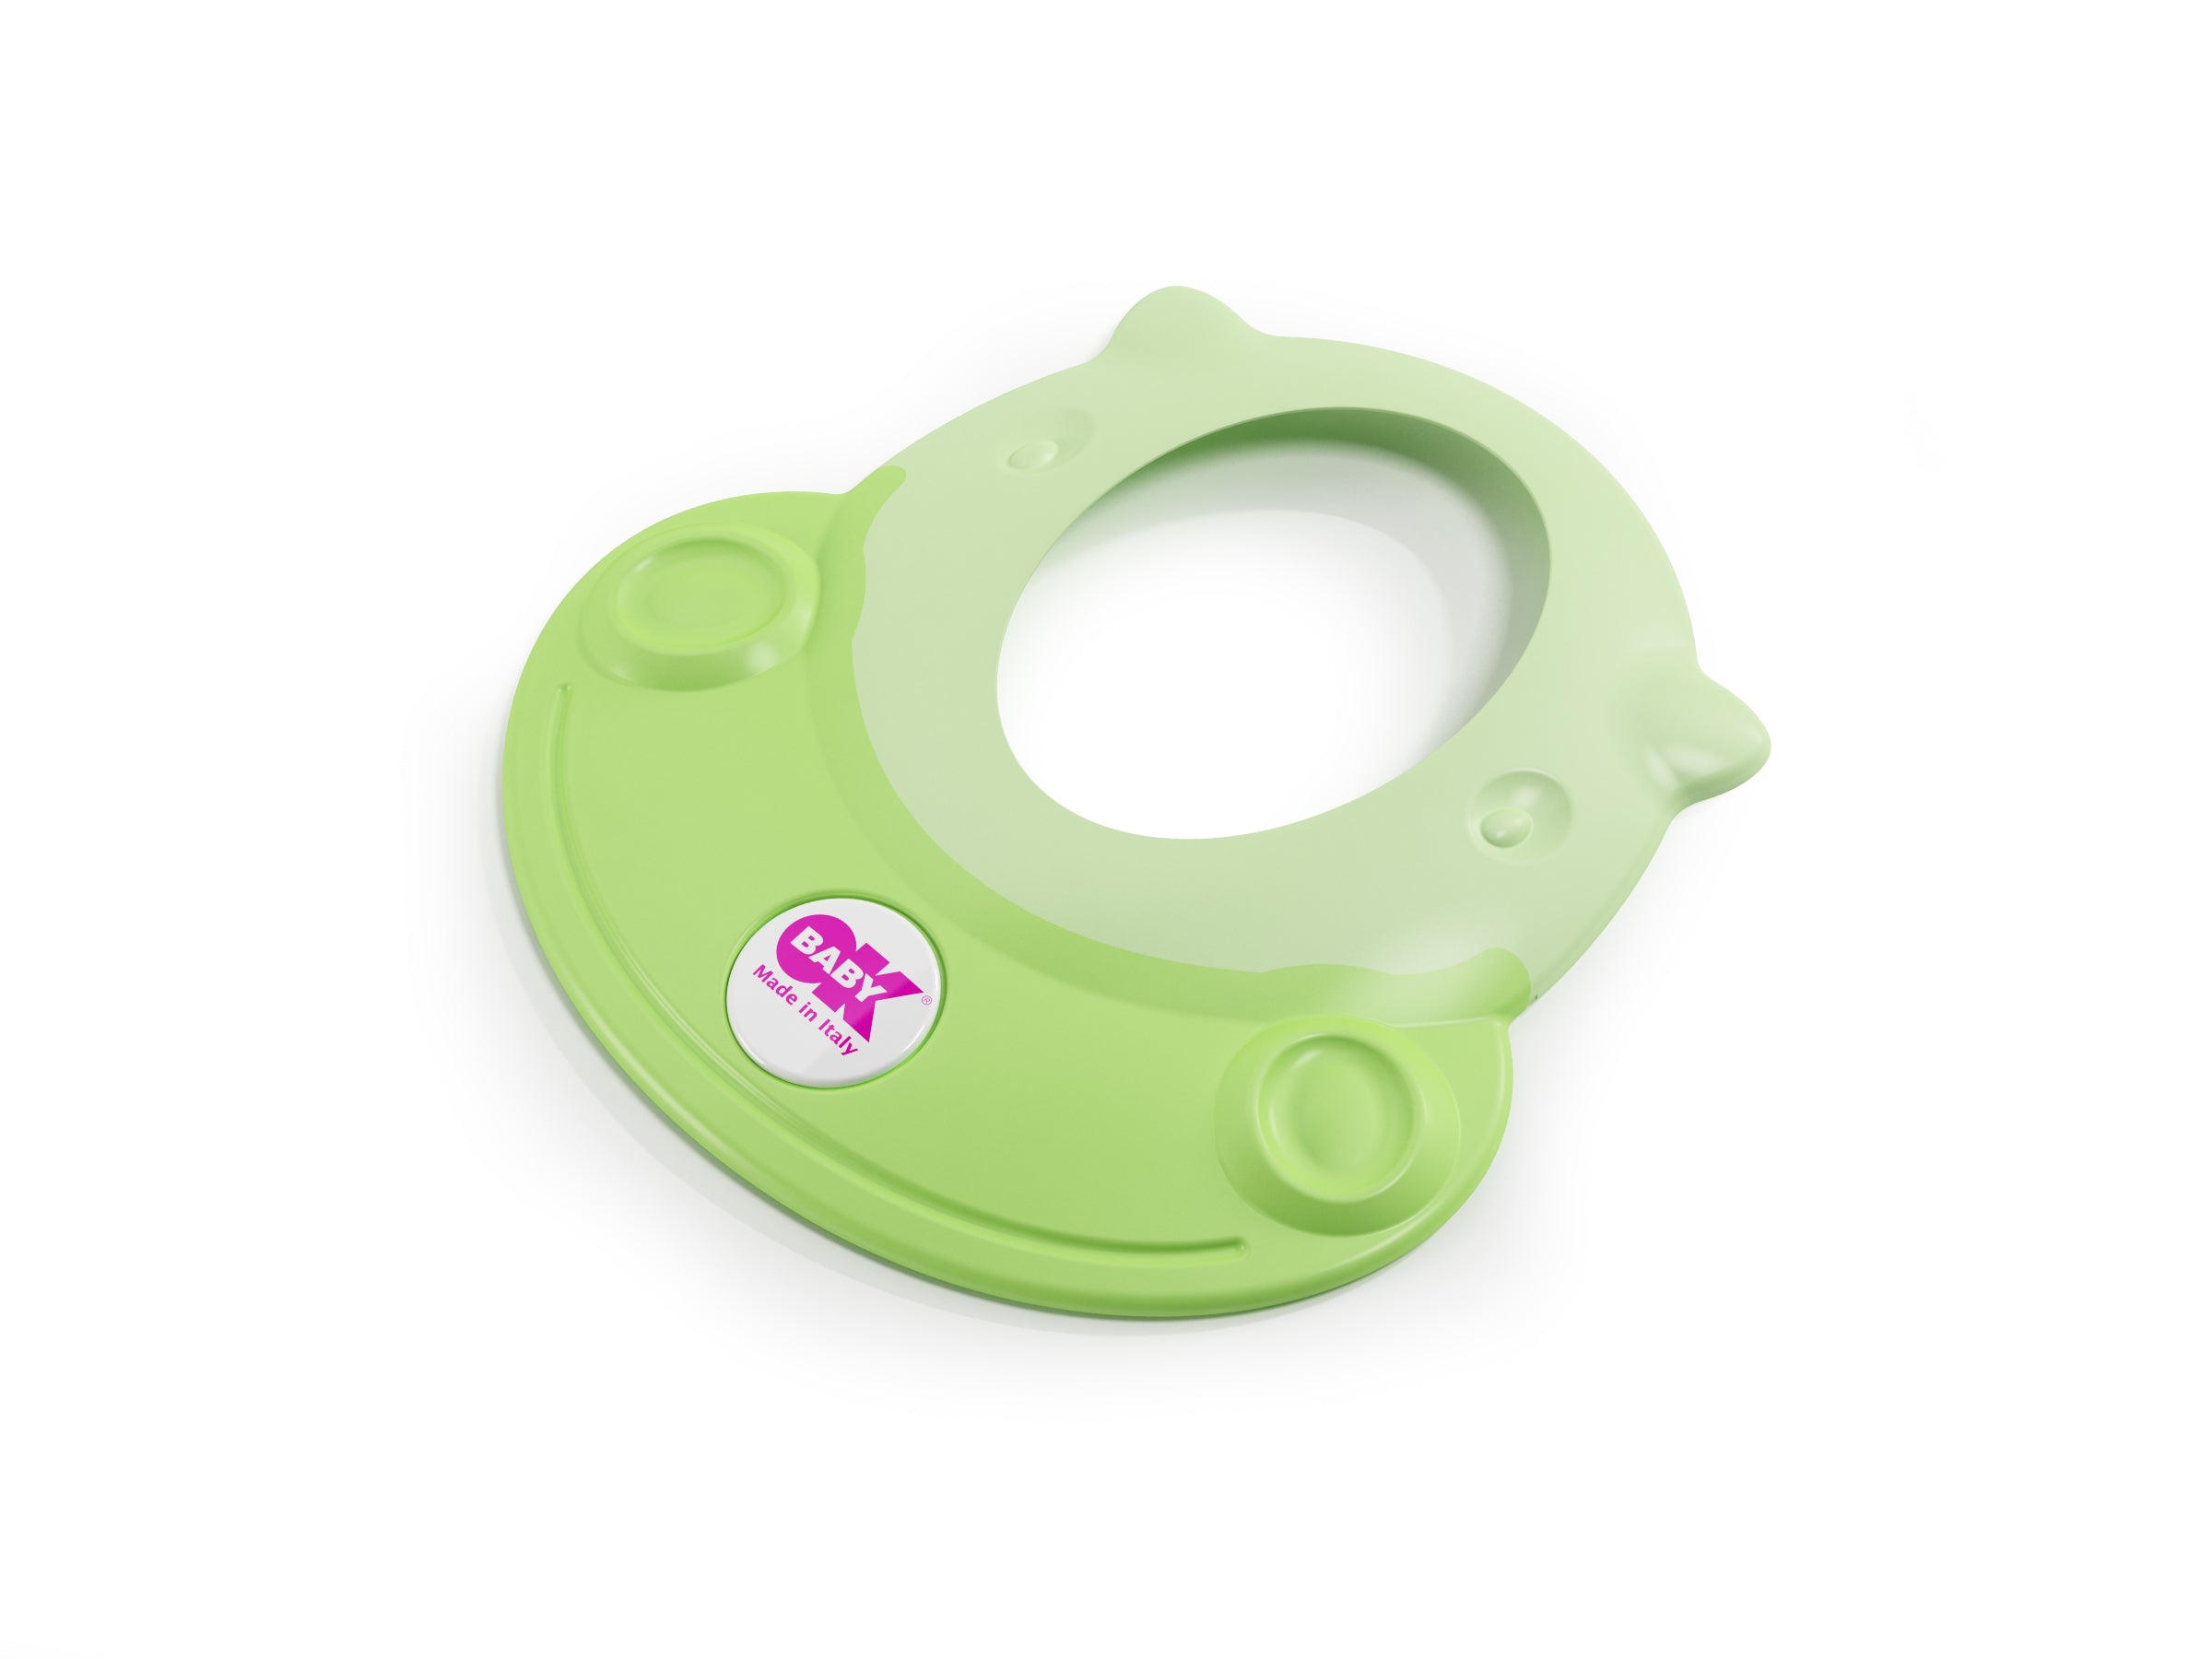 OK Baby Hippo Bath and Shower hat green - Ensures tear-free bath time by keeping soap and shampoo away from little eyes. Now available in South Africa with CB Baby.